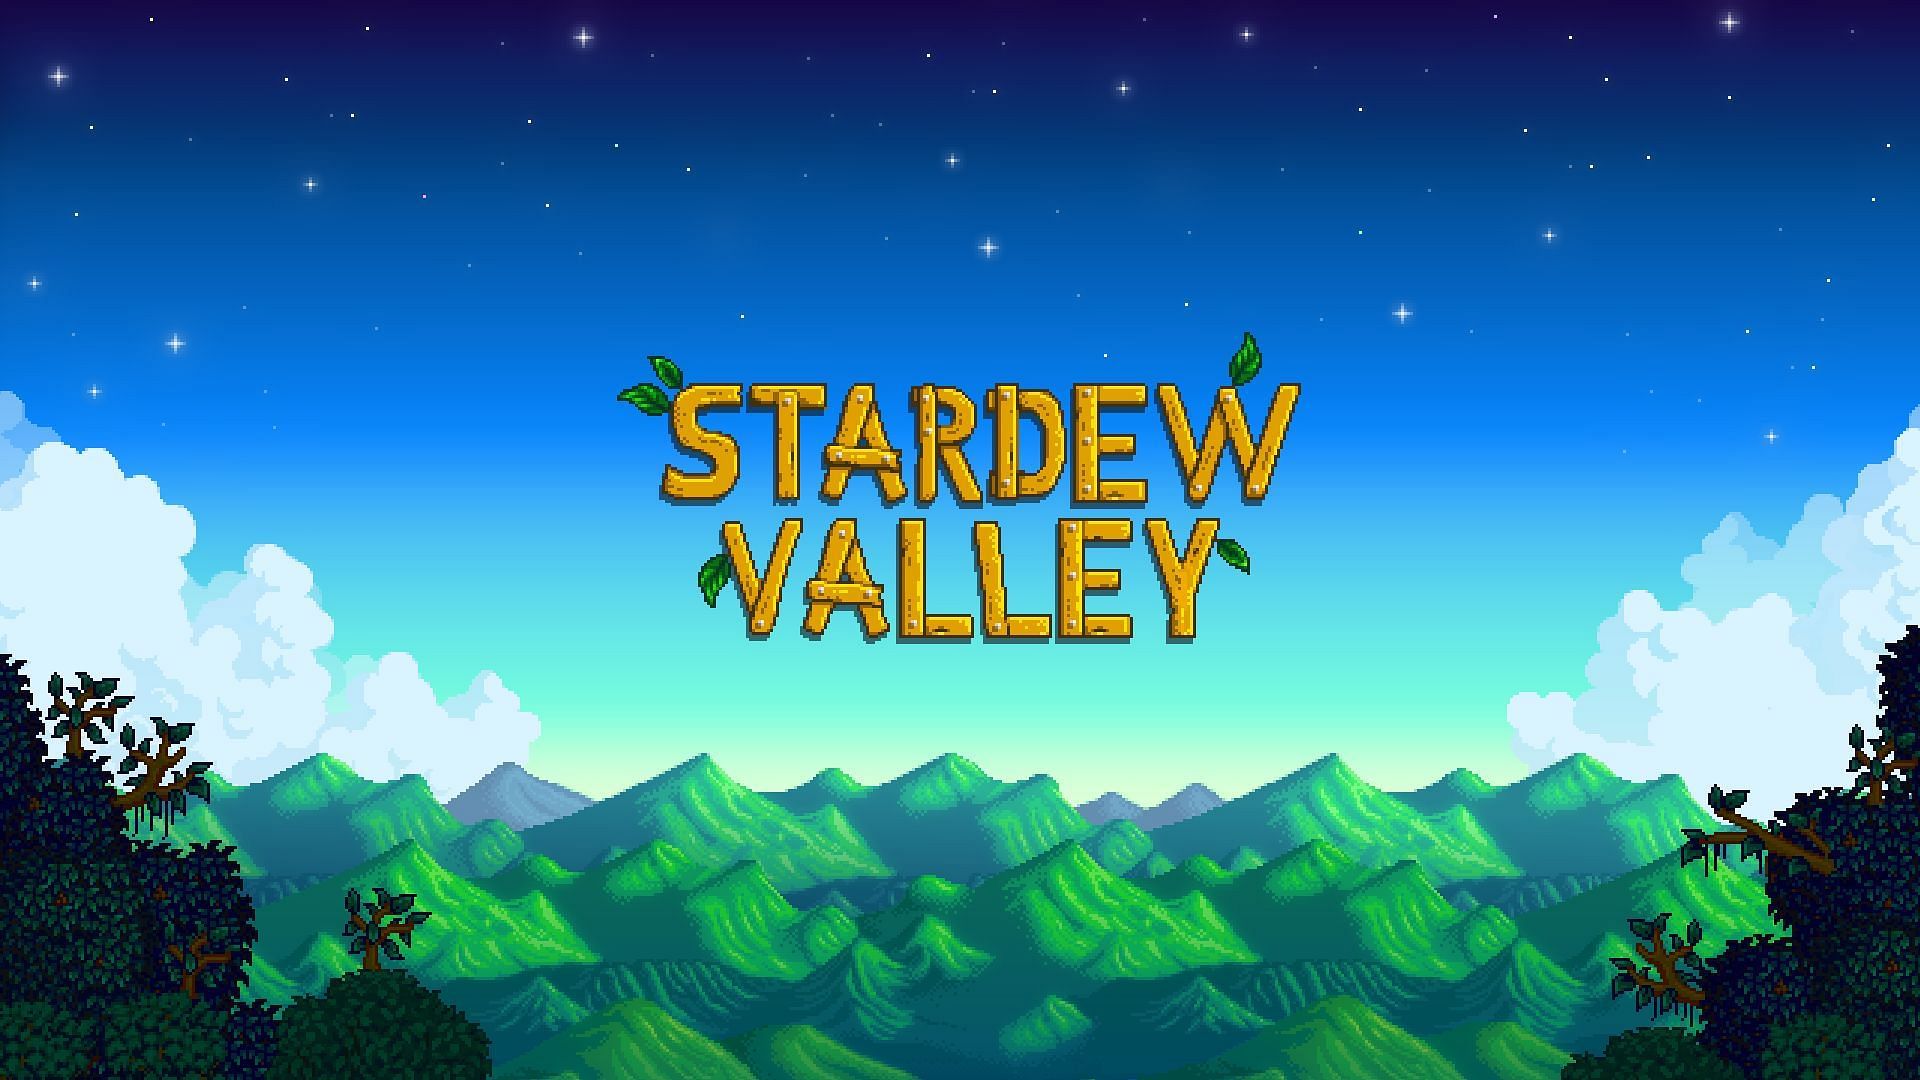 Stardew Valley is part of the Steam Autumn Sale (Image via Wallpaper Access)